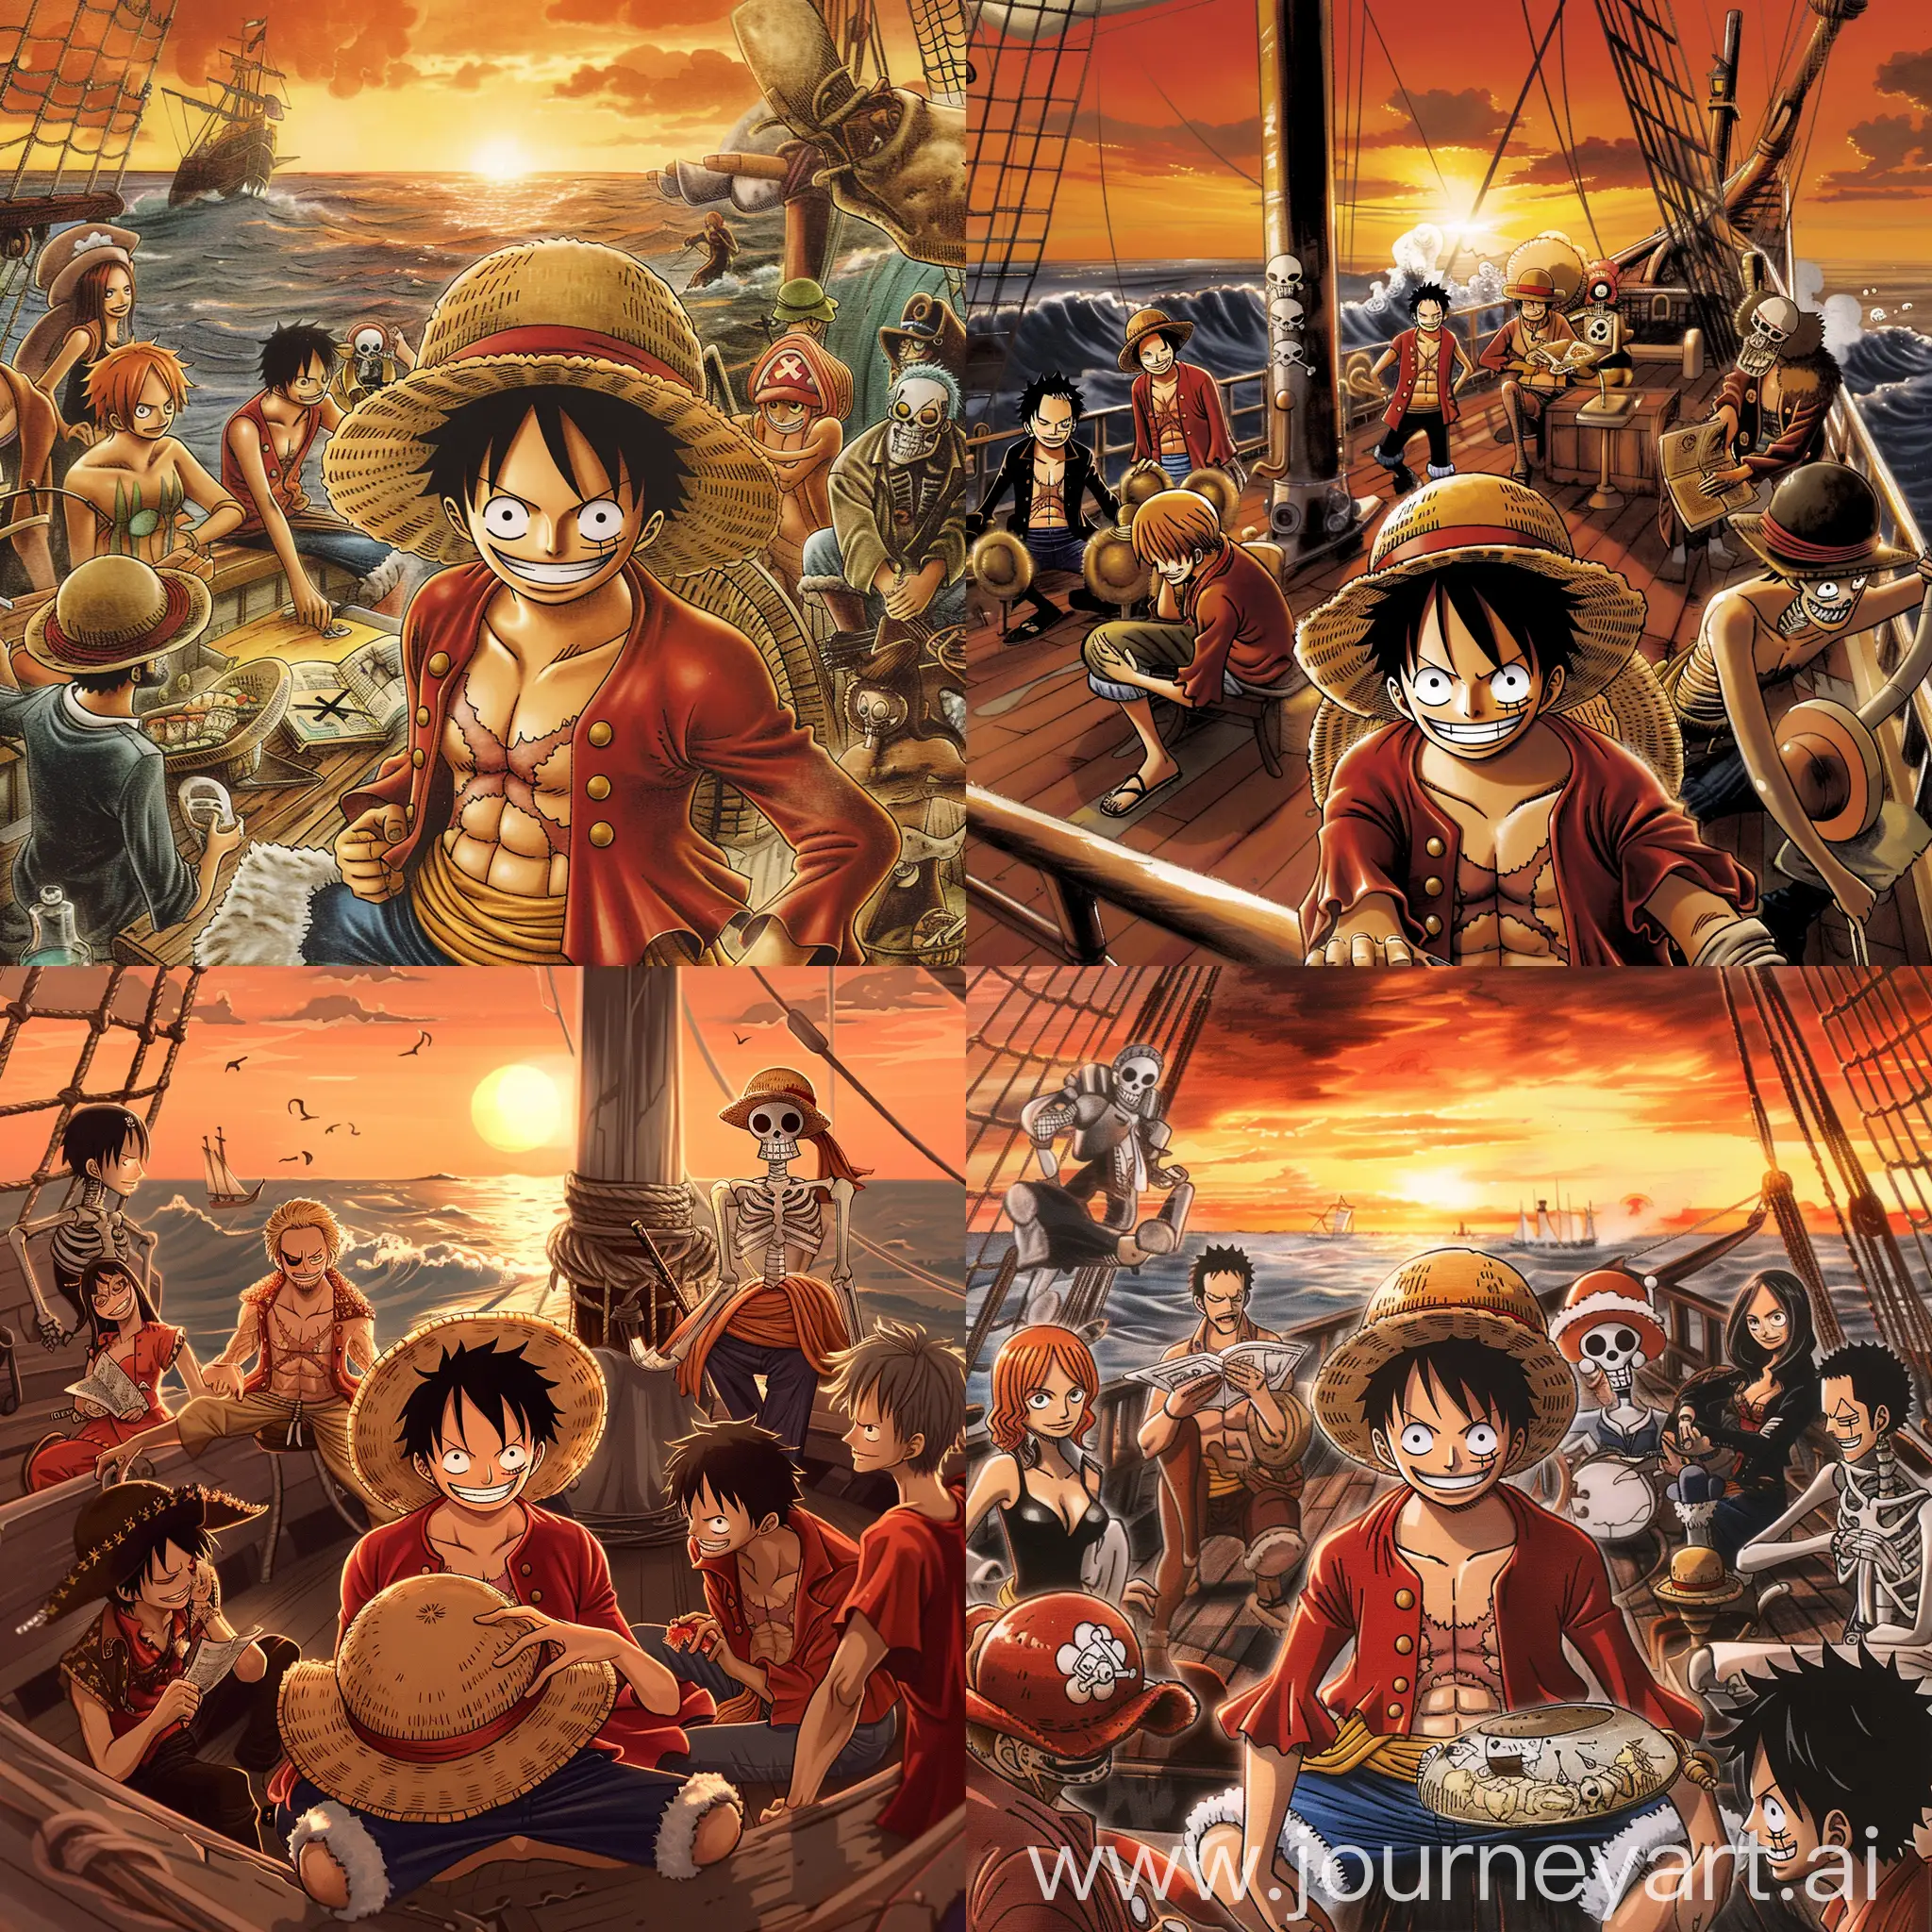 Imagine an epic scene at sea, where the members of the Straw Hat Pirates from One Piece are gathered on their ship, the Thousand Sunny. Luffy, the fearless captain, is at the center, with his confident smile and bright eyes, holding his straw hat. By his side, Zoro, the skilled swordsman, wields his swords with determination, while Sanji, the talented cook, prepares a delicious meal on the stern of the ship. Nami, the astute navigator, is on the deck, studying maps and planning the crew's next destination. Usopp, the brave sharpshooter, is atop the mainmast, scanning the horizon for imminent dangers. Chopper, the doctor and adorable mascot of the crew, sits next to Franky, the talented engineer, as they discuss improvements for the Thousand Sunny. Robin, the mysterious archaeologist, sits in a quiet corner, reading an ancient book about the Poneglyphs. And last but not least, Brook, the skeleton musician, cheers everyone up with his cheerful music. The sun sets on the horizon, painting the sky in shades of orange and red, while the waves of the sea dance around the ship, creating a truly memorable scene for the Straw Hat Pirates from One Piece.